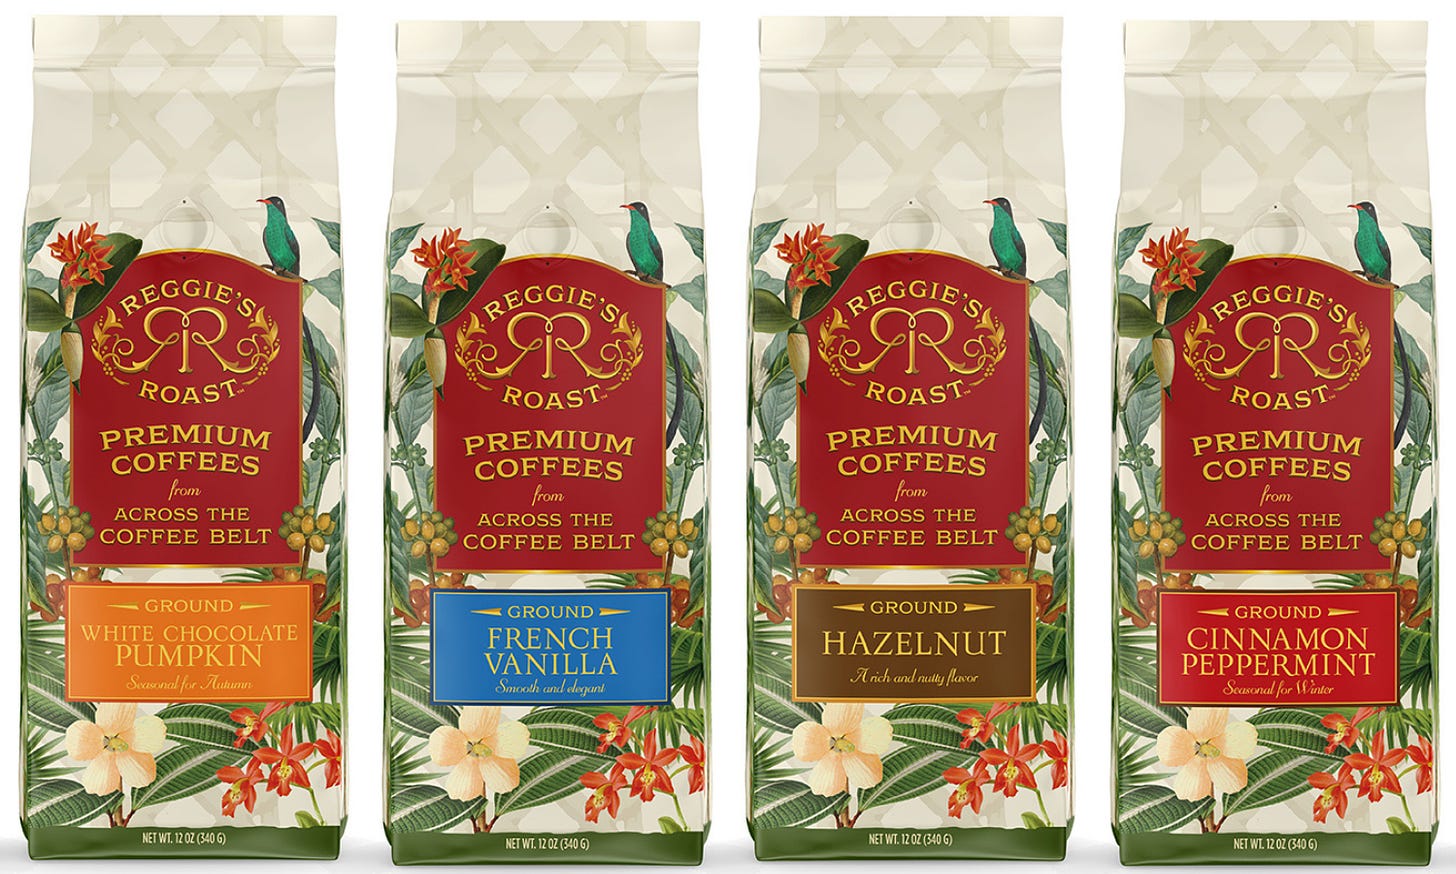 Side by side front views of coffee bags featuring the Reggie's Roast logo in gold on maroon over a Jamaican floral design.